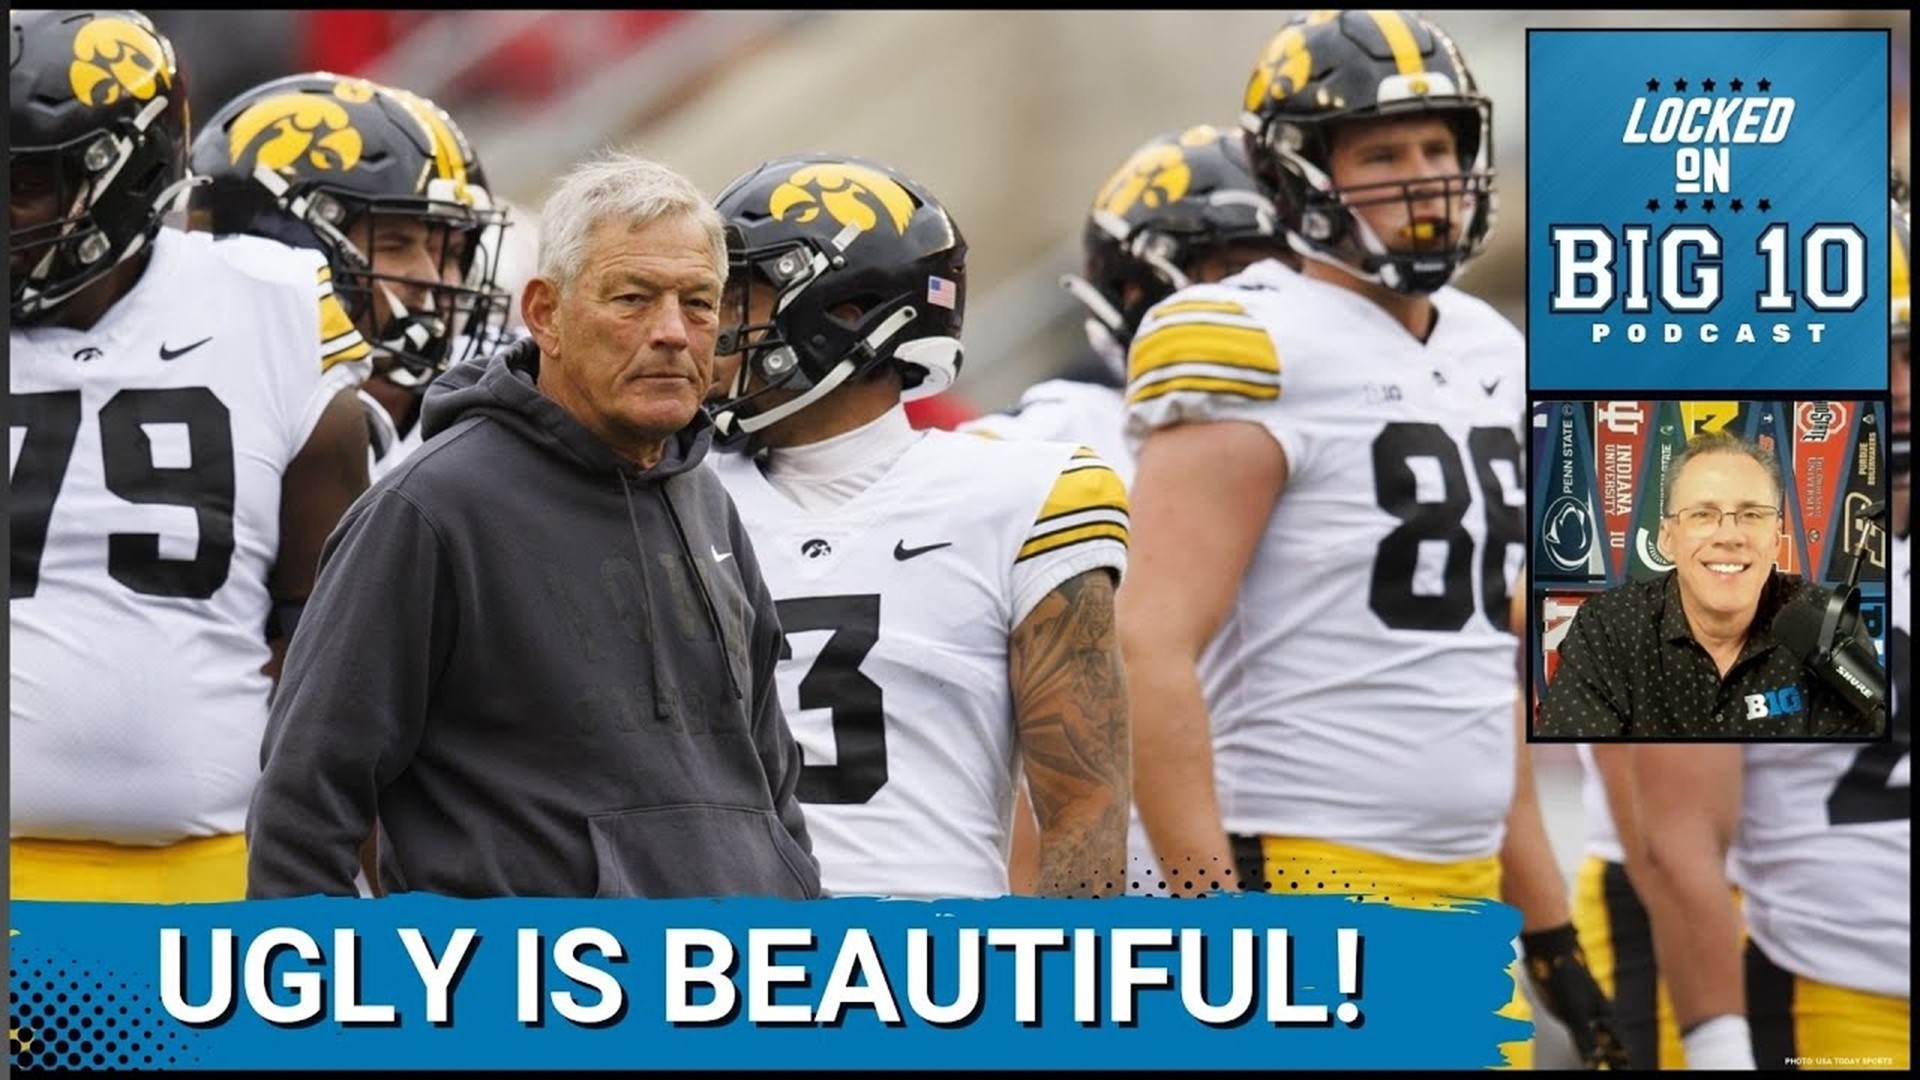 The Iowa Hawkeyes are (6-1) after an ugly but satisfactory road win over the Wisconsin Badgers.  Iowa football is what it is.